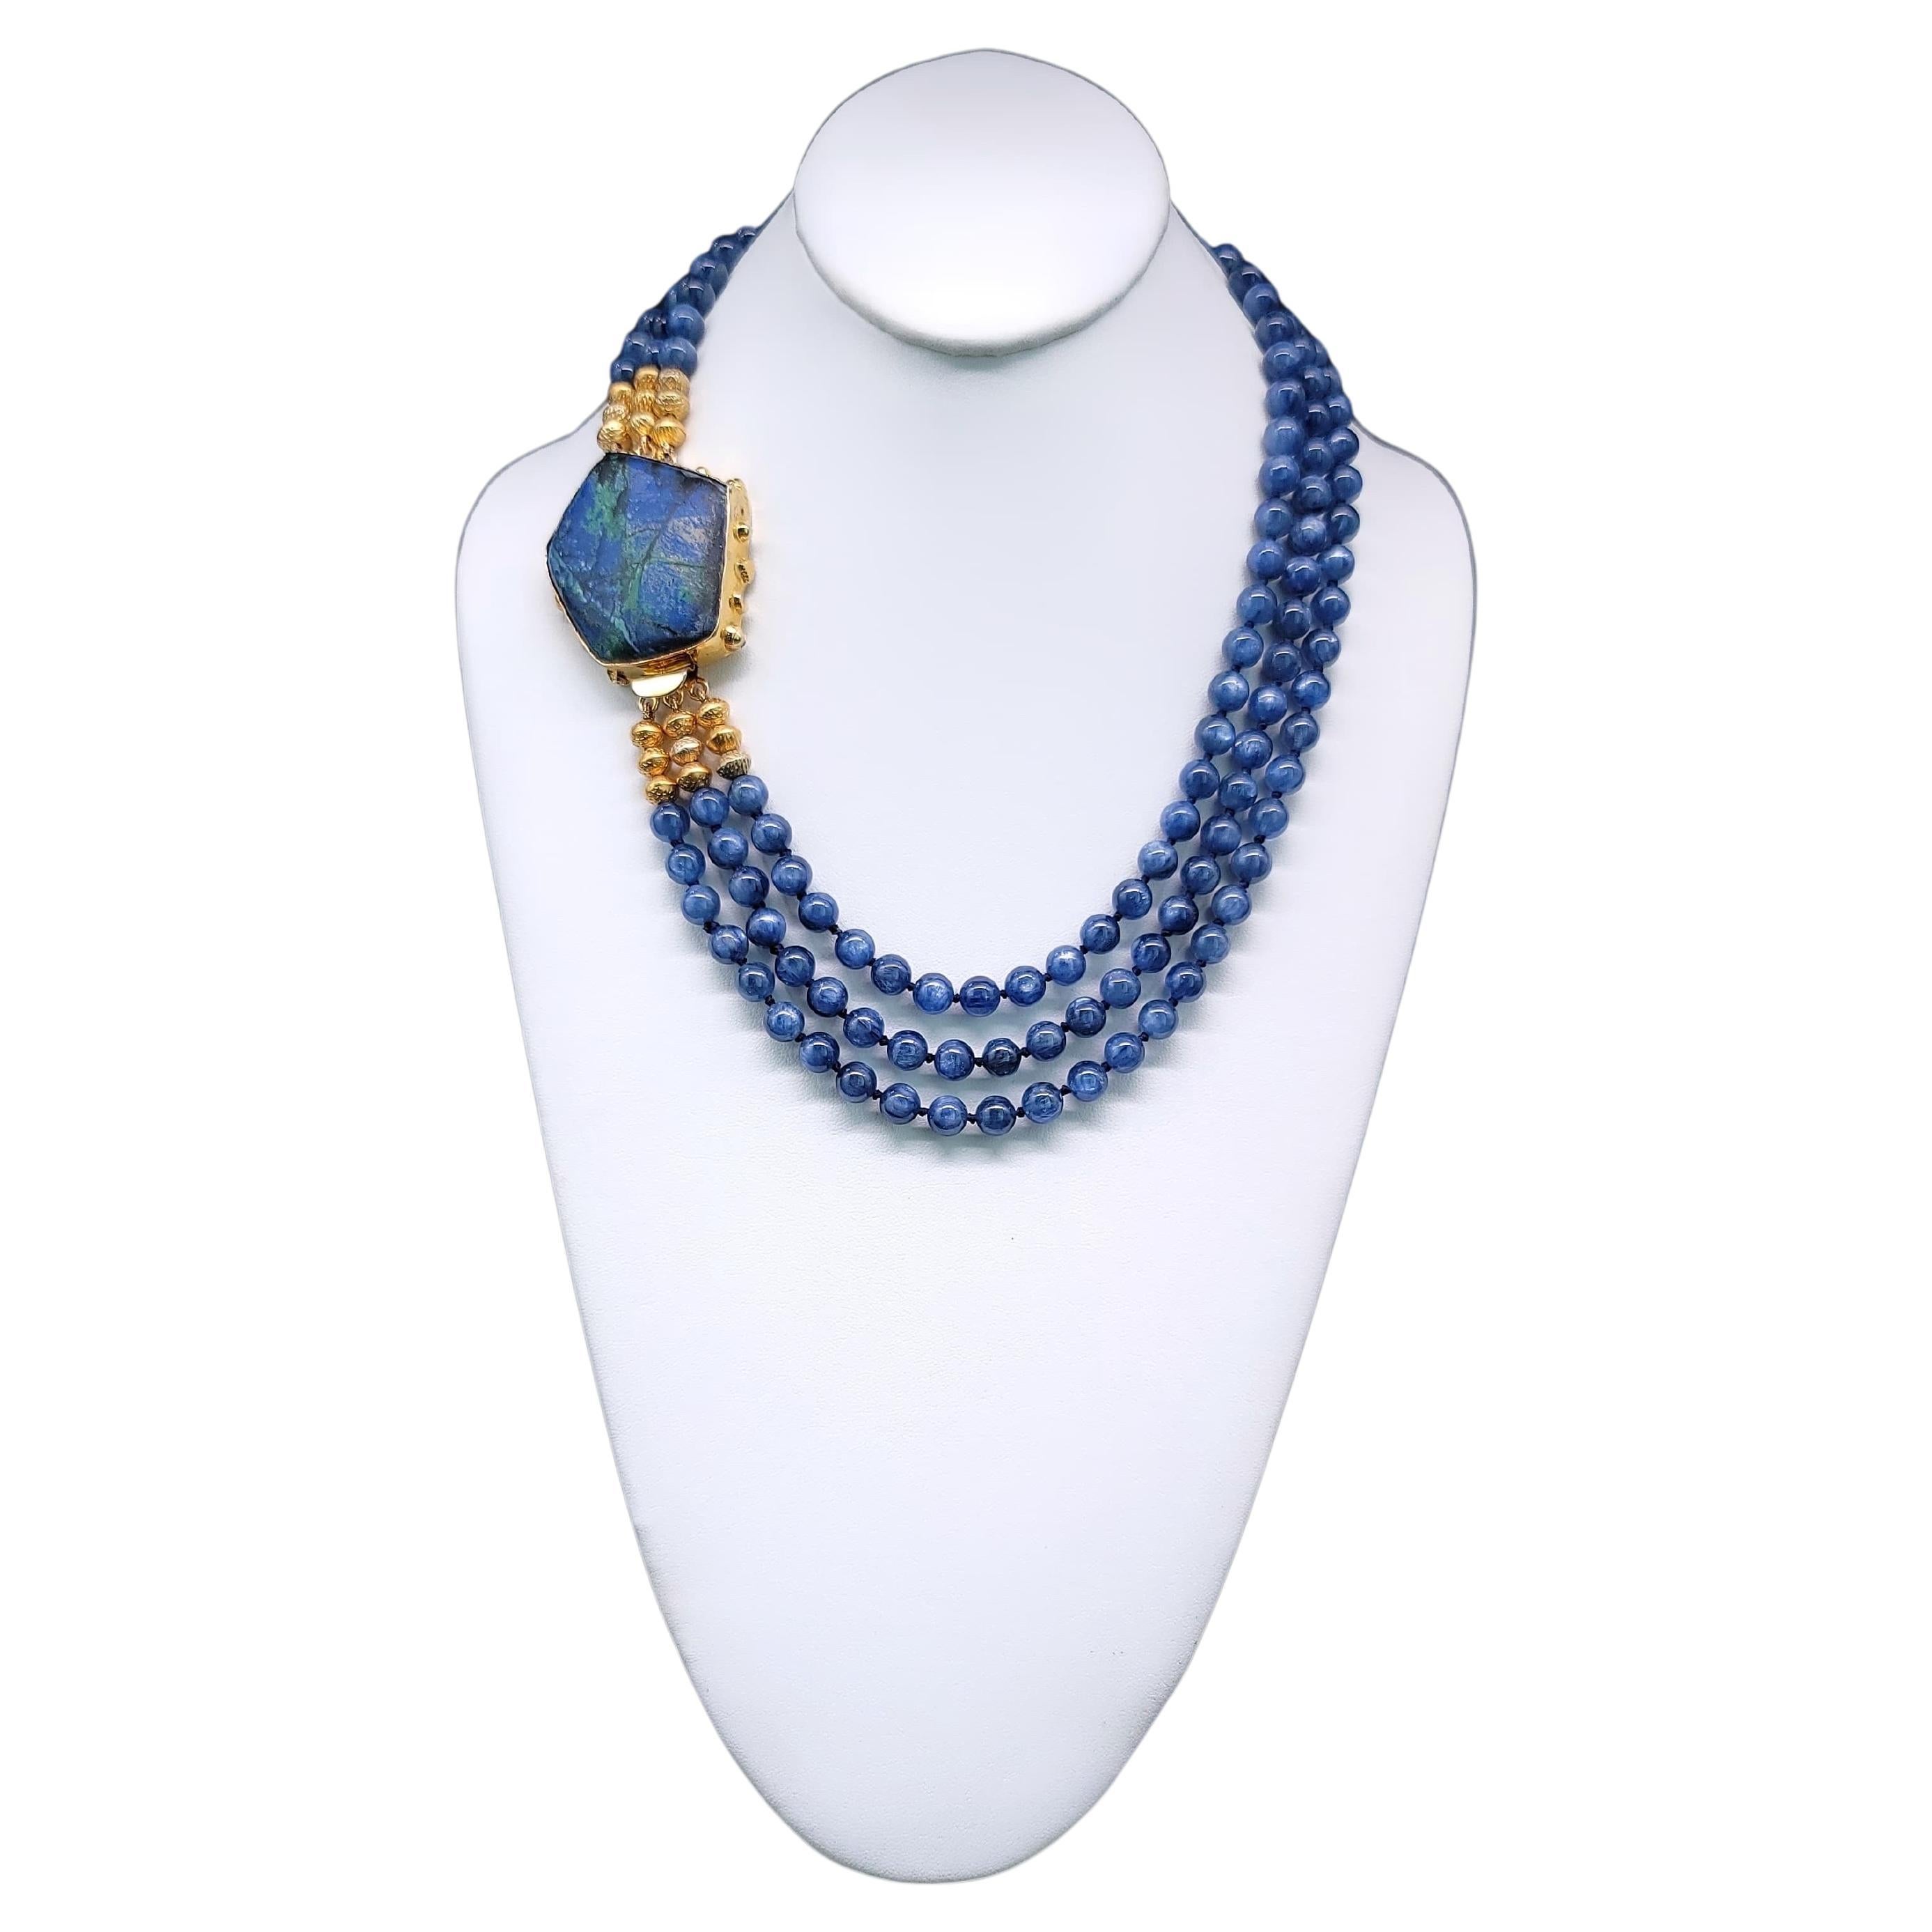 A.Jeschel Polished Kyanite beads necklace with a Chrysocolla clasp. For Sale